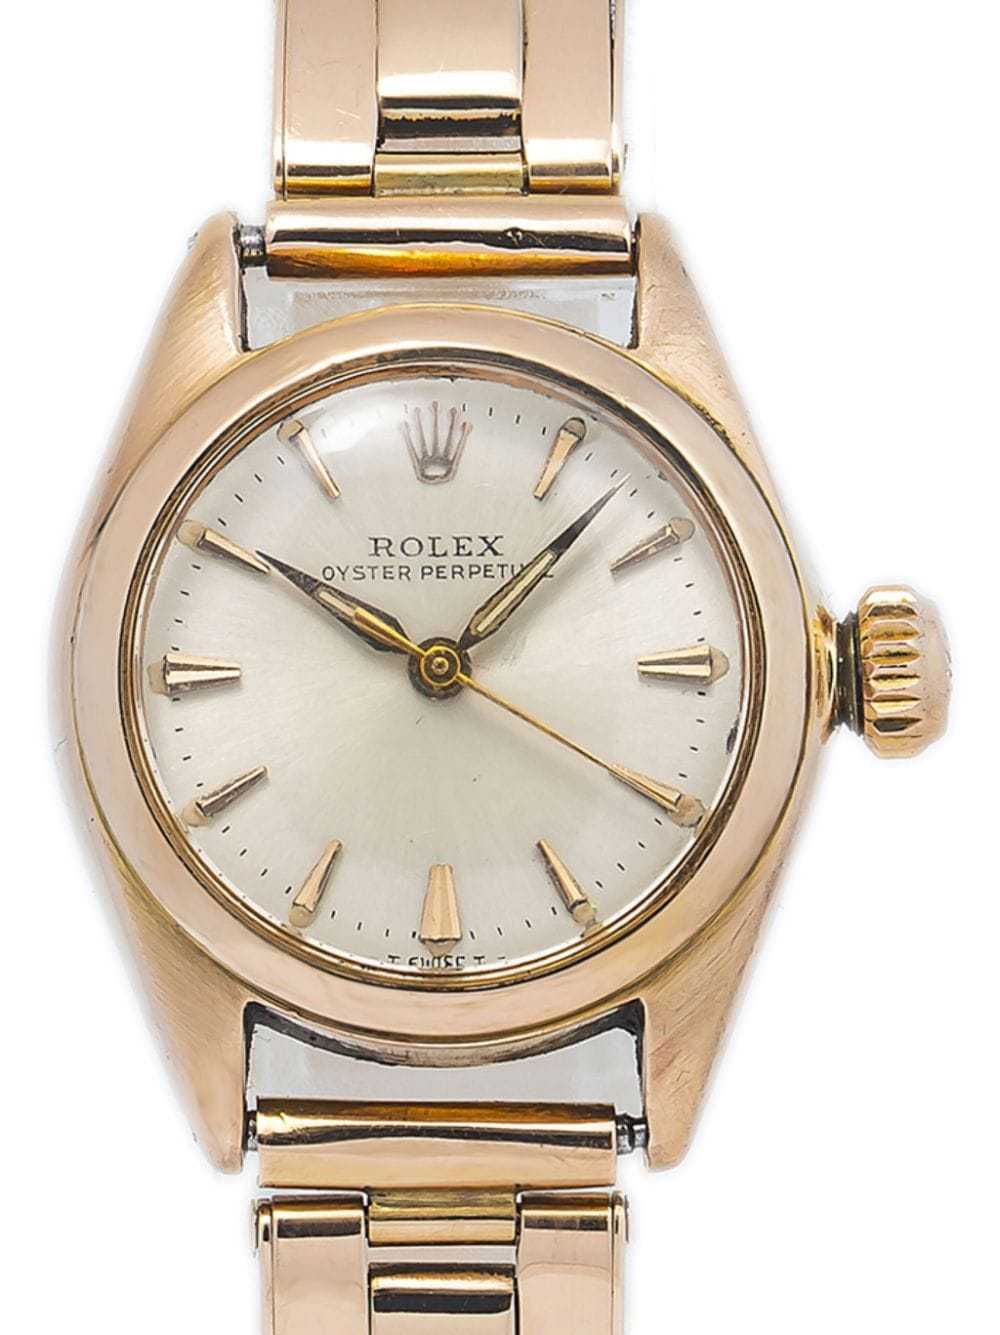 Rolex pre-owned Oyster Perpetual 24mm - Silver - image 2